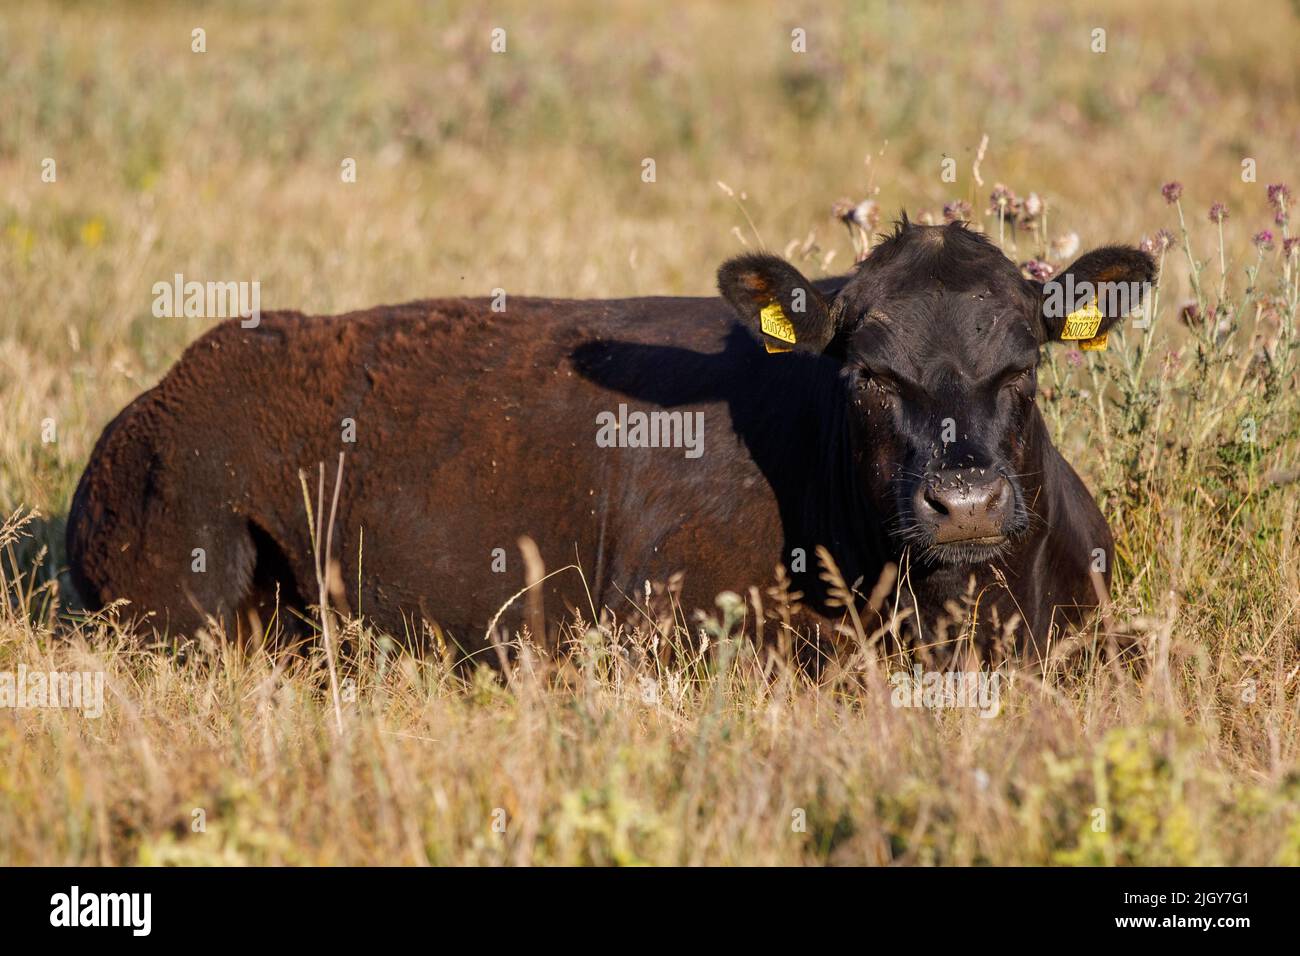 A bull lies in the grass staring at the viewer with many flies buzzing around his nose and eyes. Summertime, dry grass, bright sunlight. Stock Photo